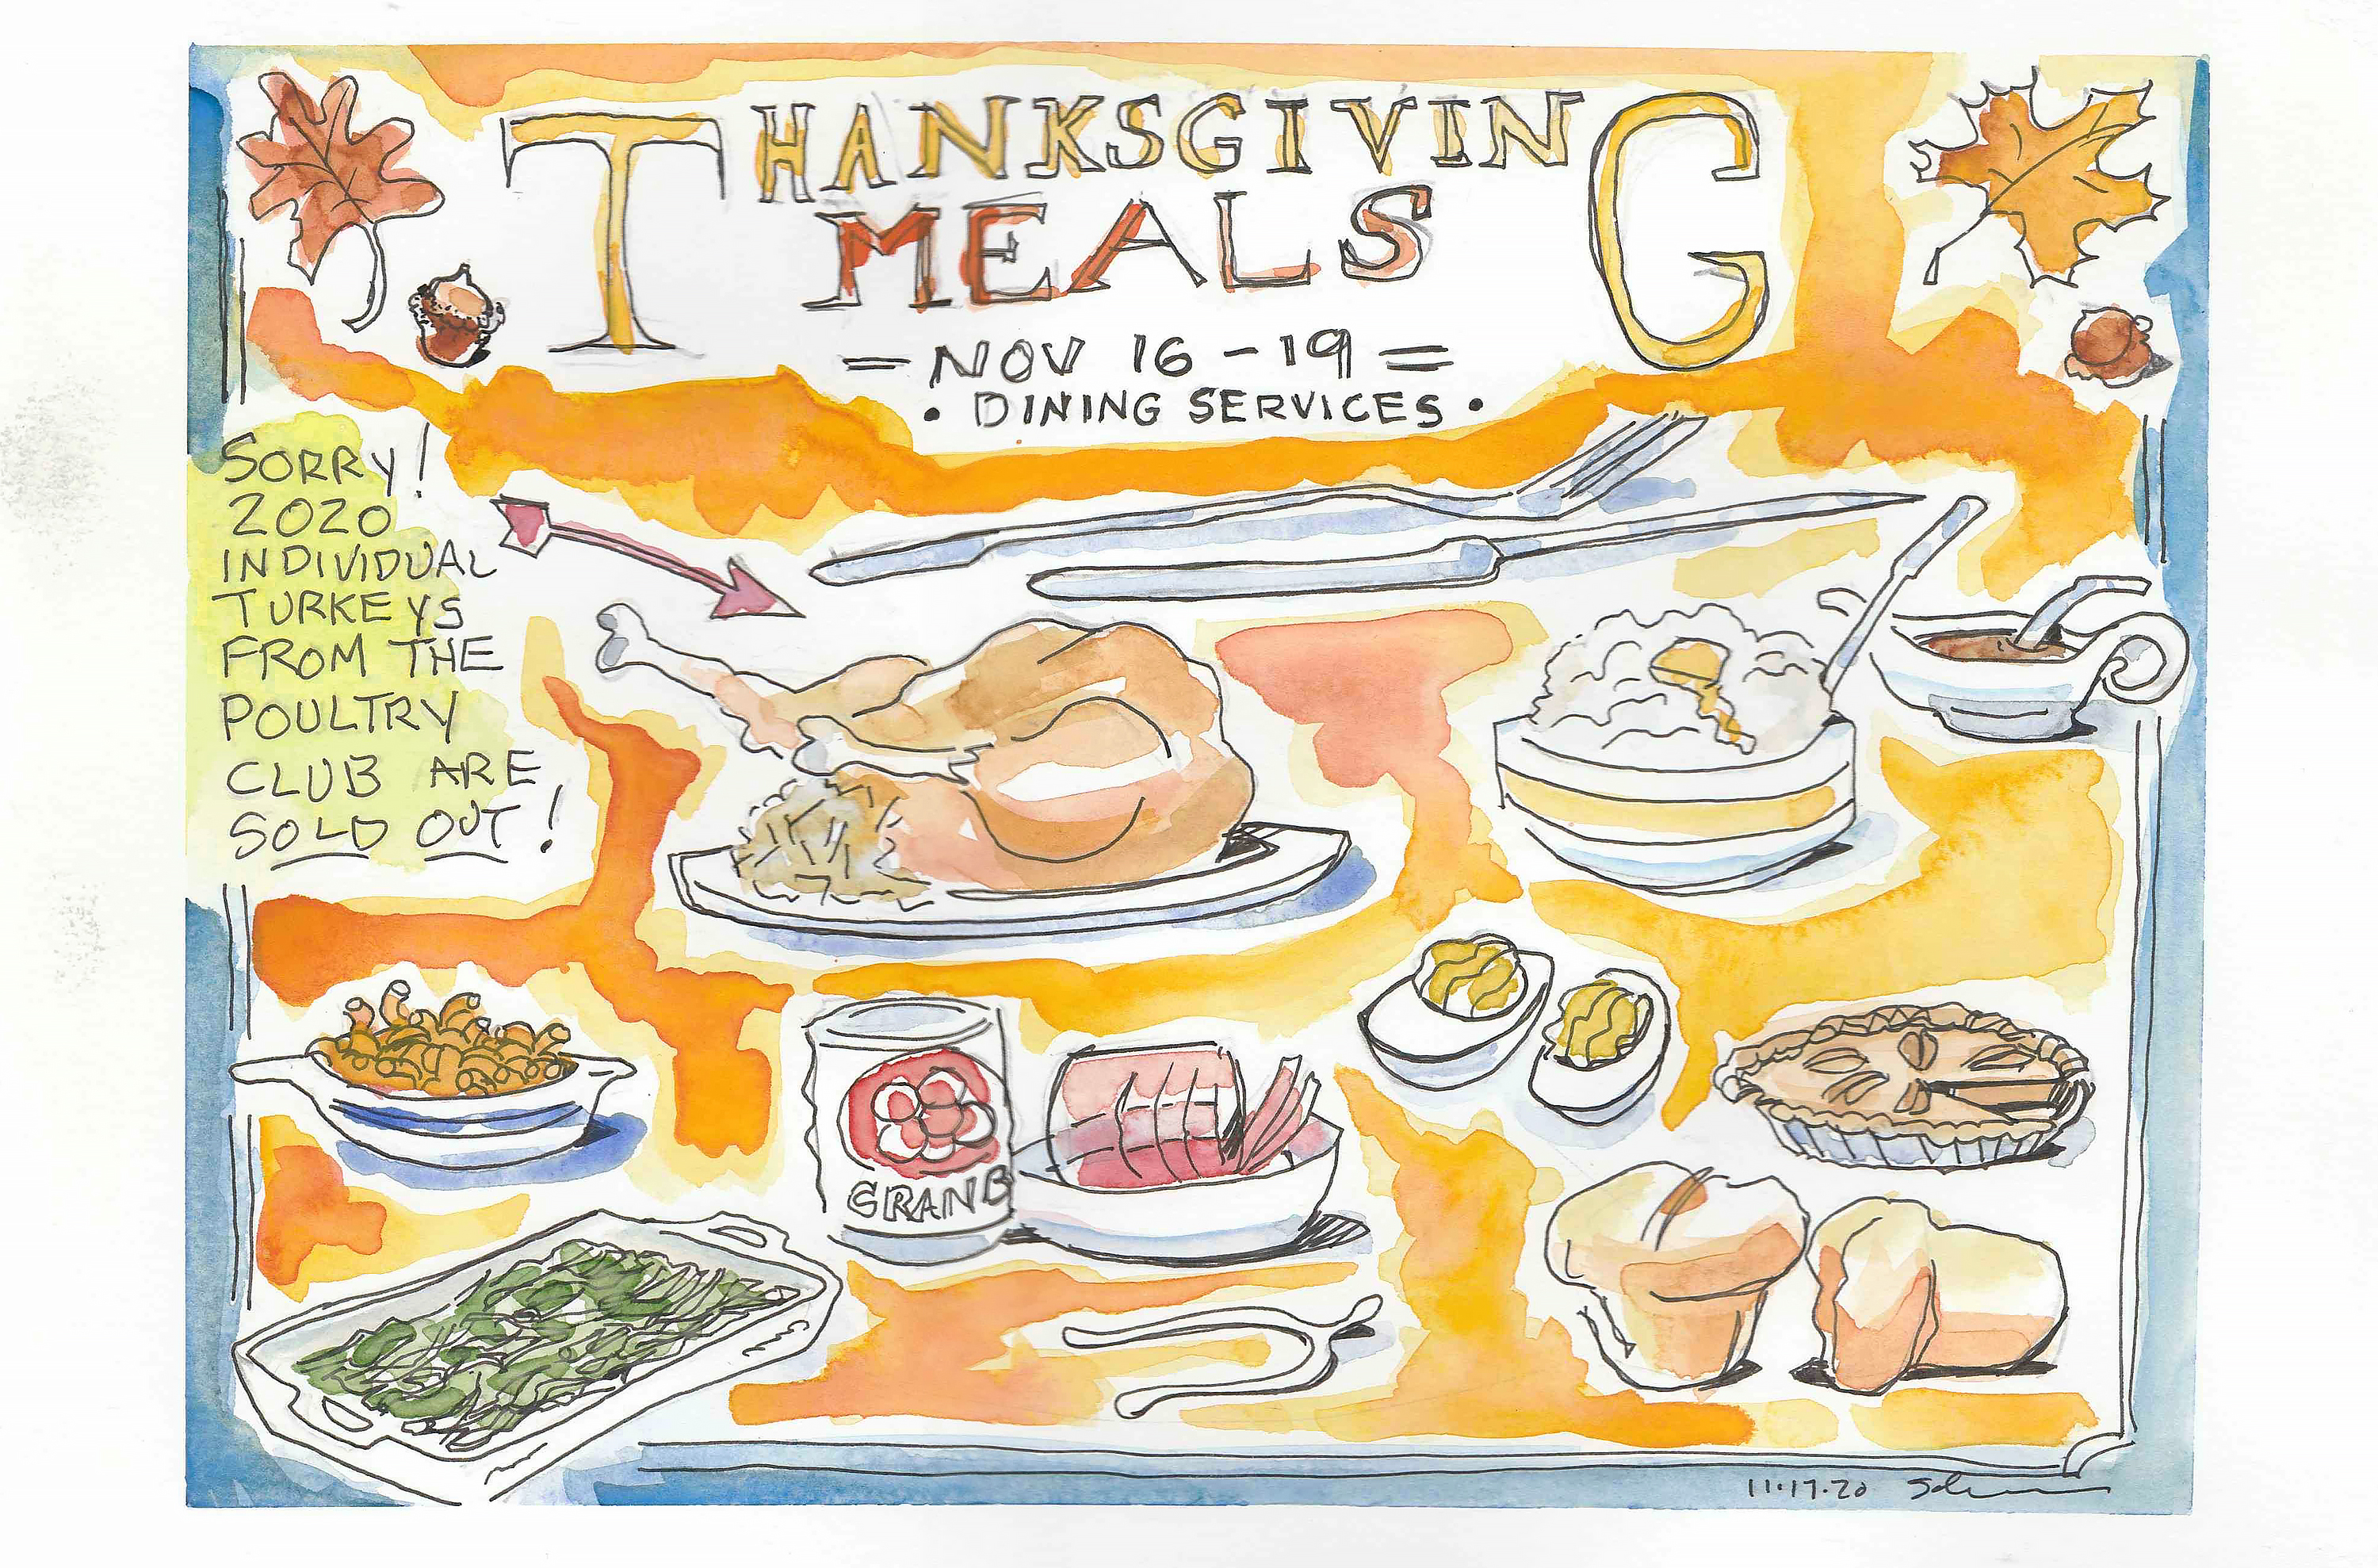 Thanksgiving Meal Week - Appeared on Nov. 18, 2020